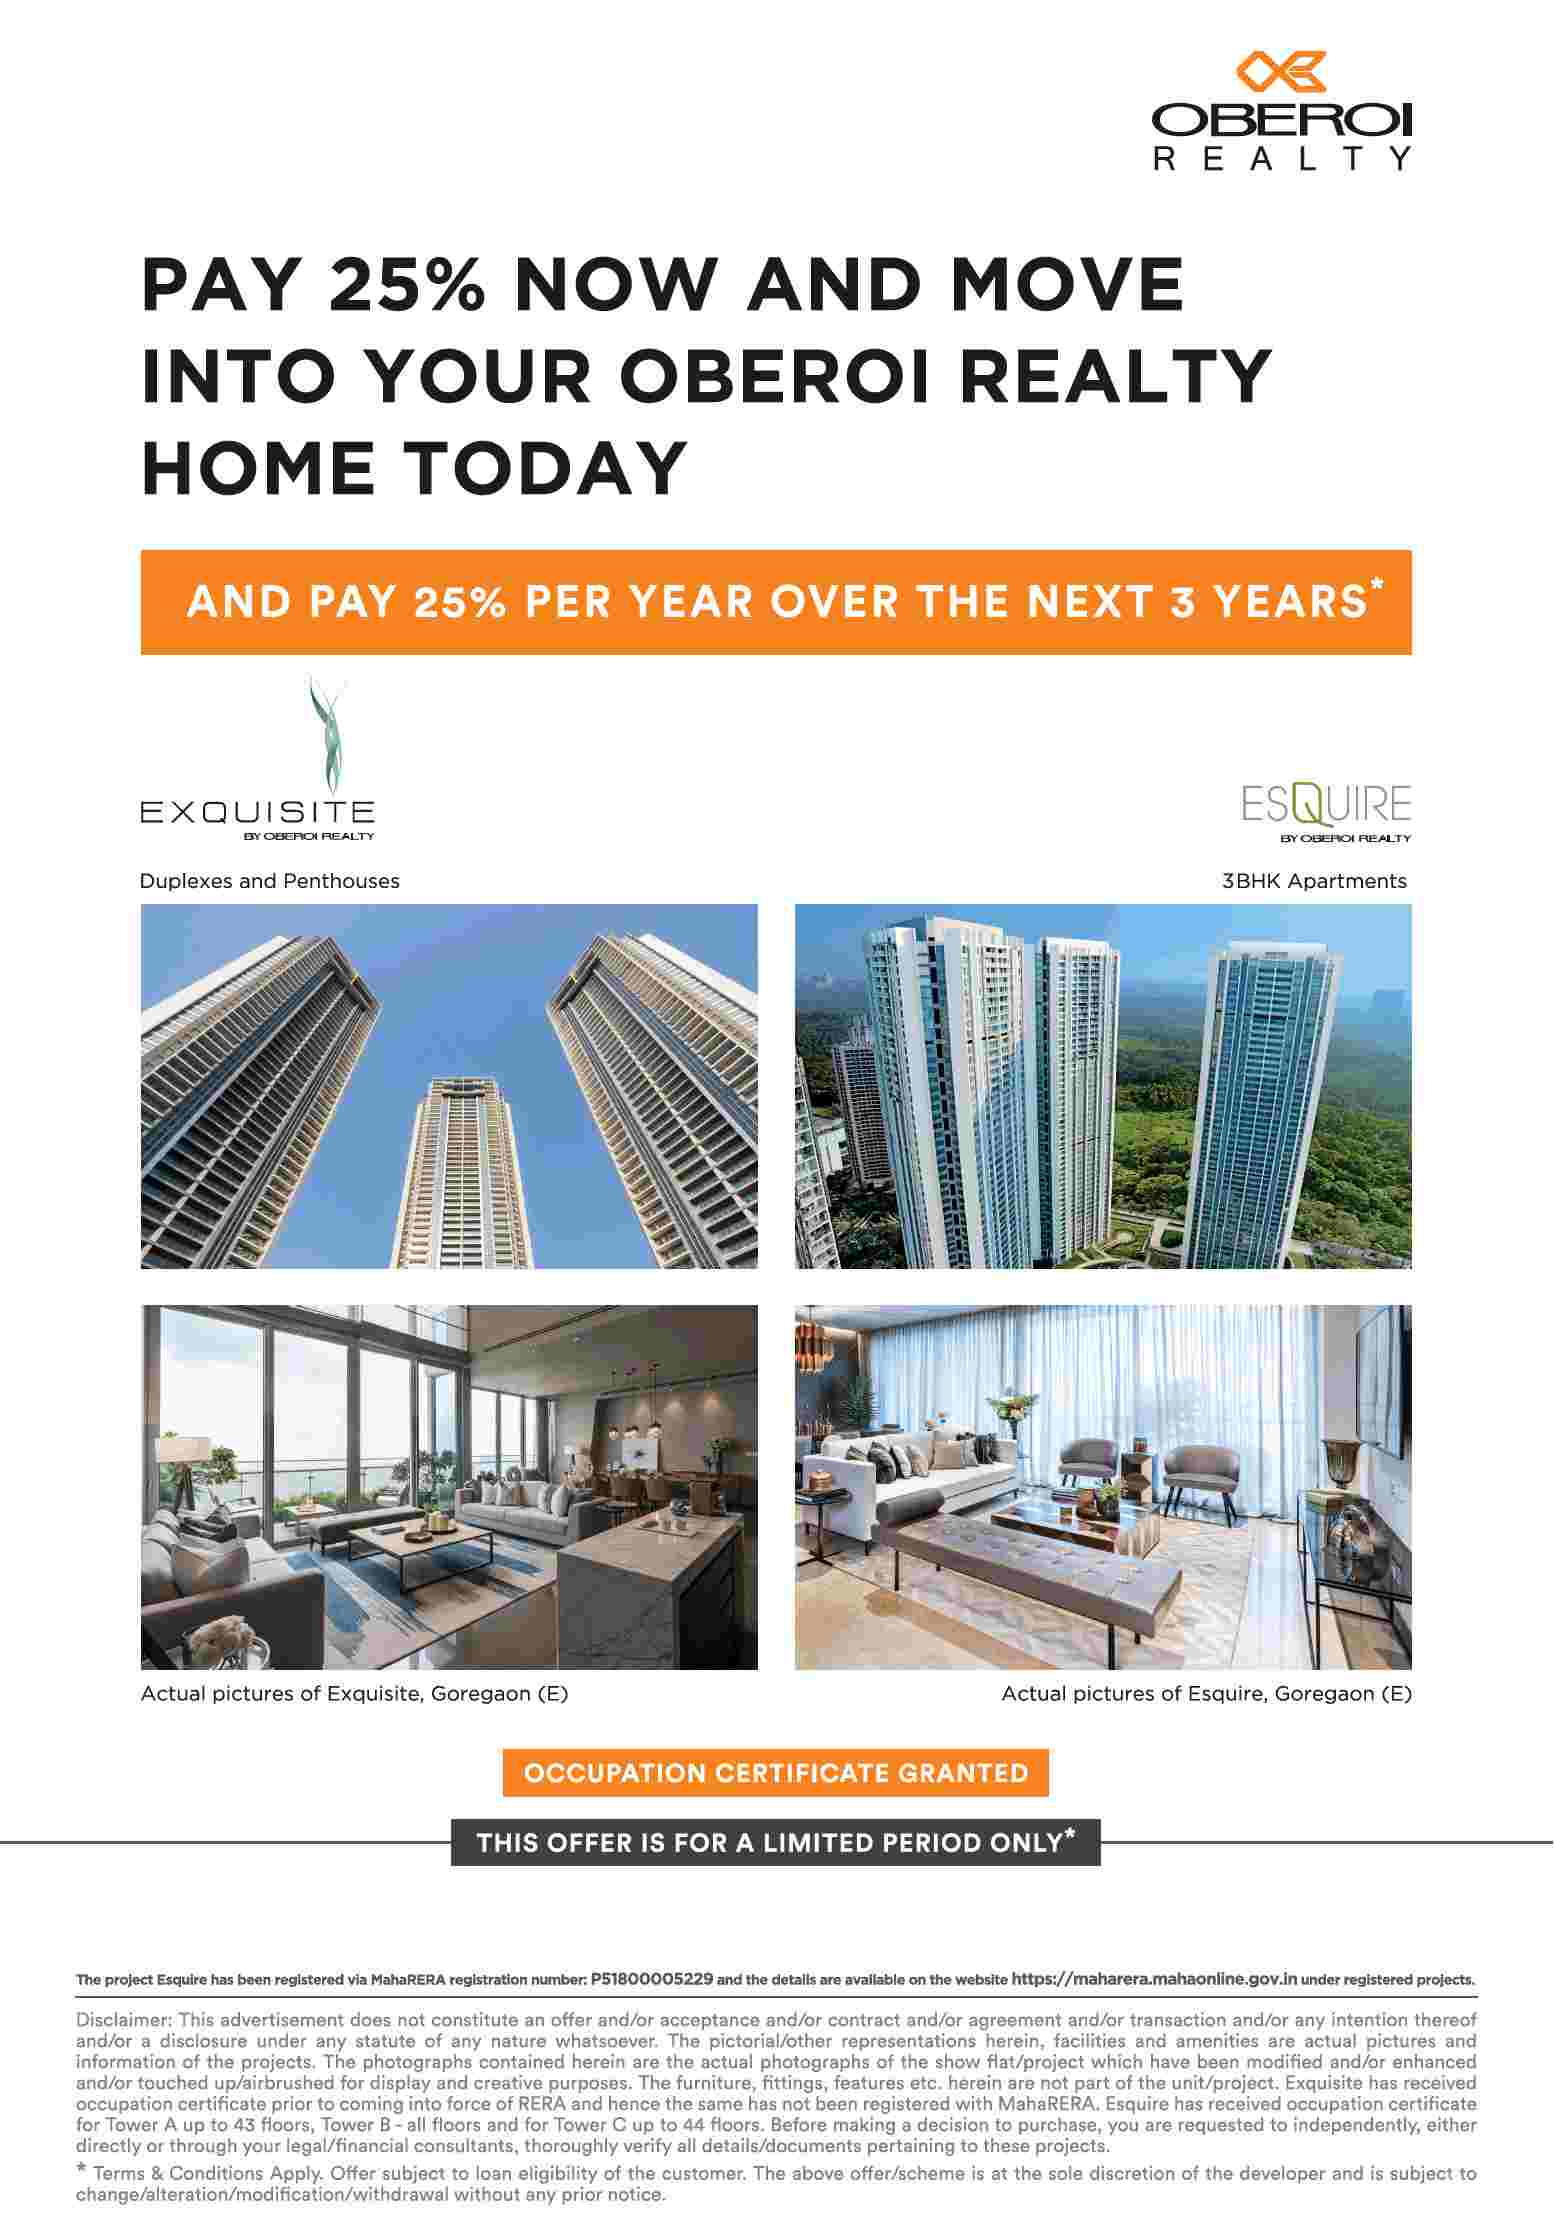 Pay 25% now and move into your Oberoi Realty home today in Mumbai Update